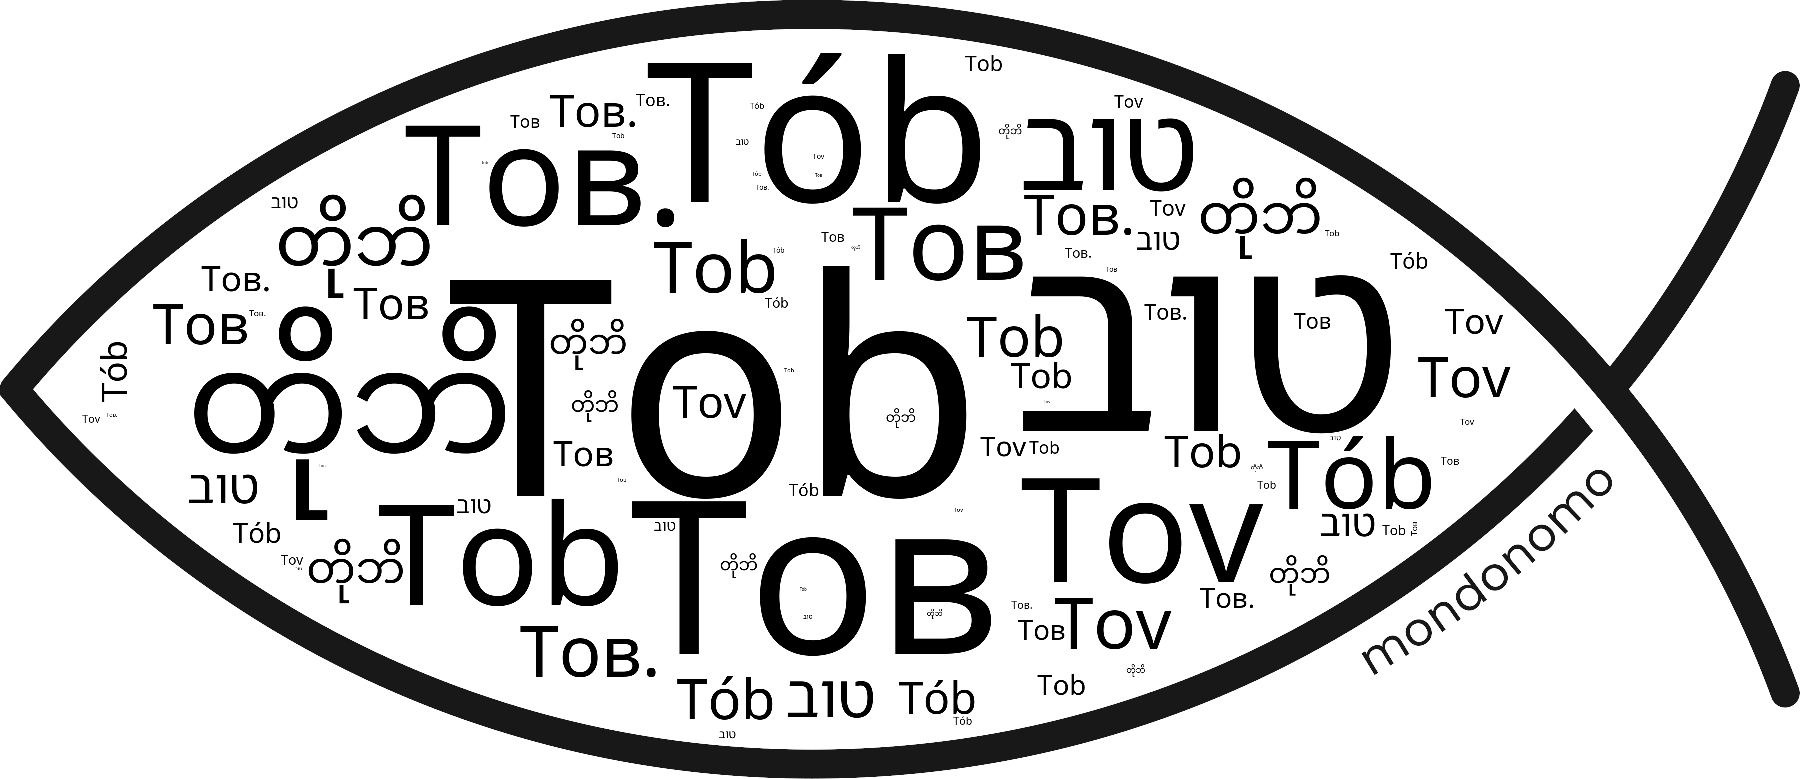 Name Tob in the world's Bibles